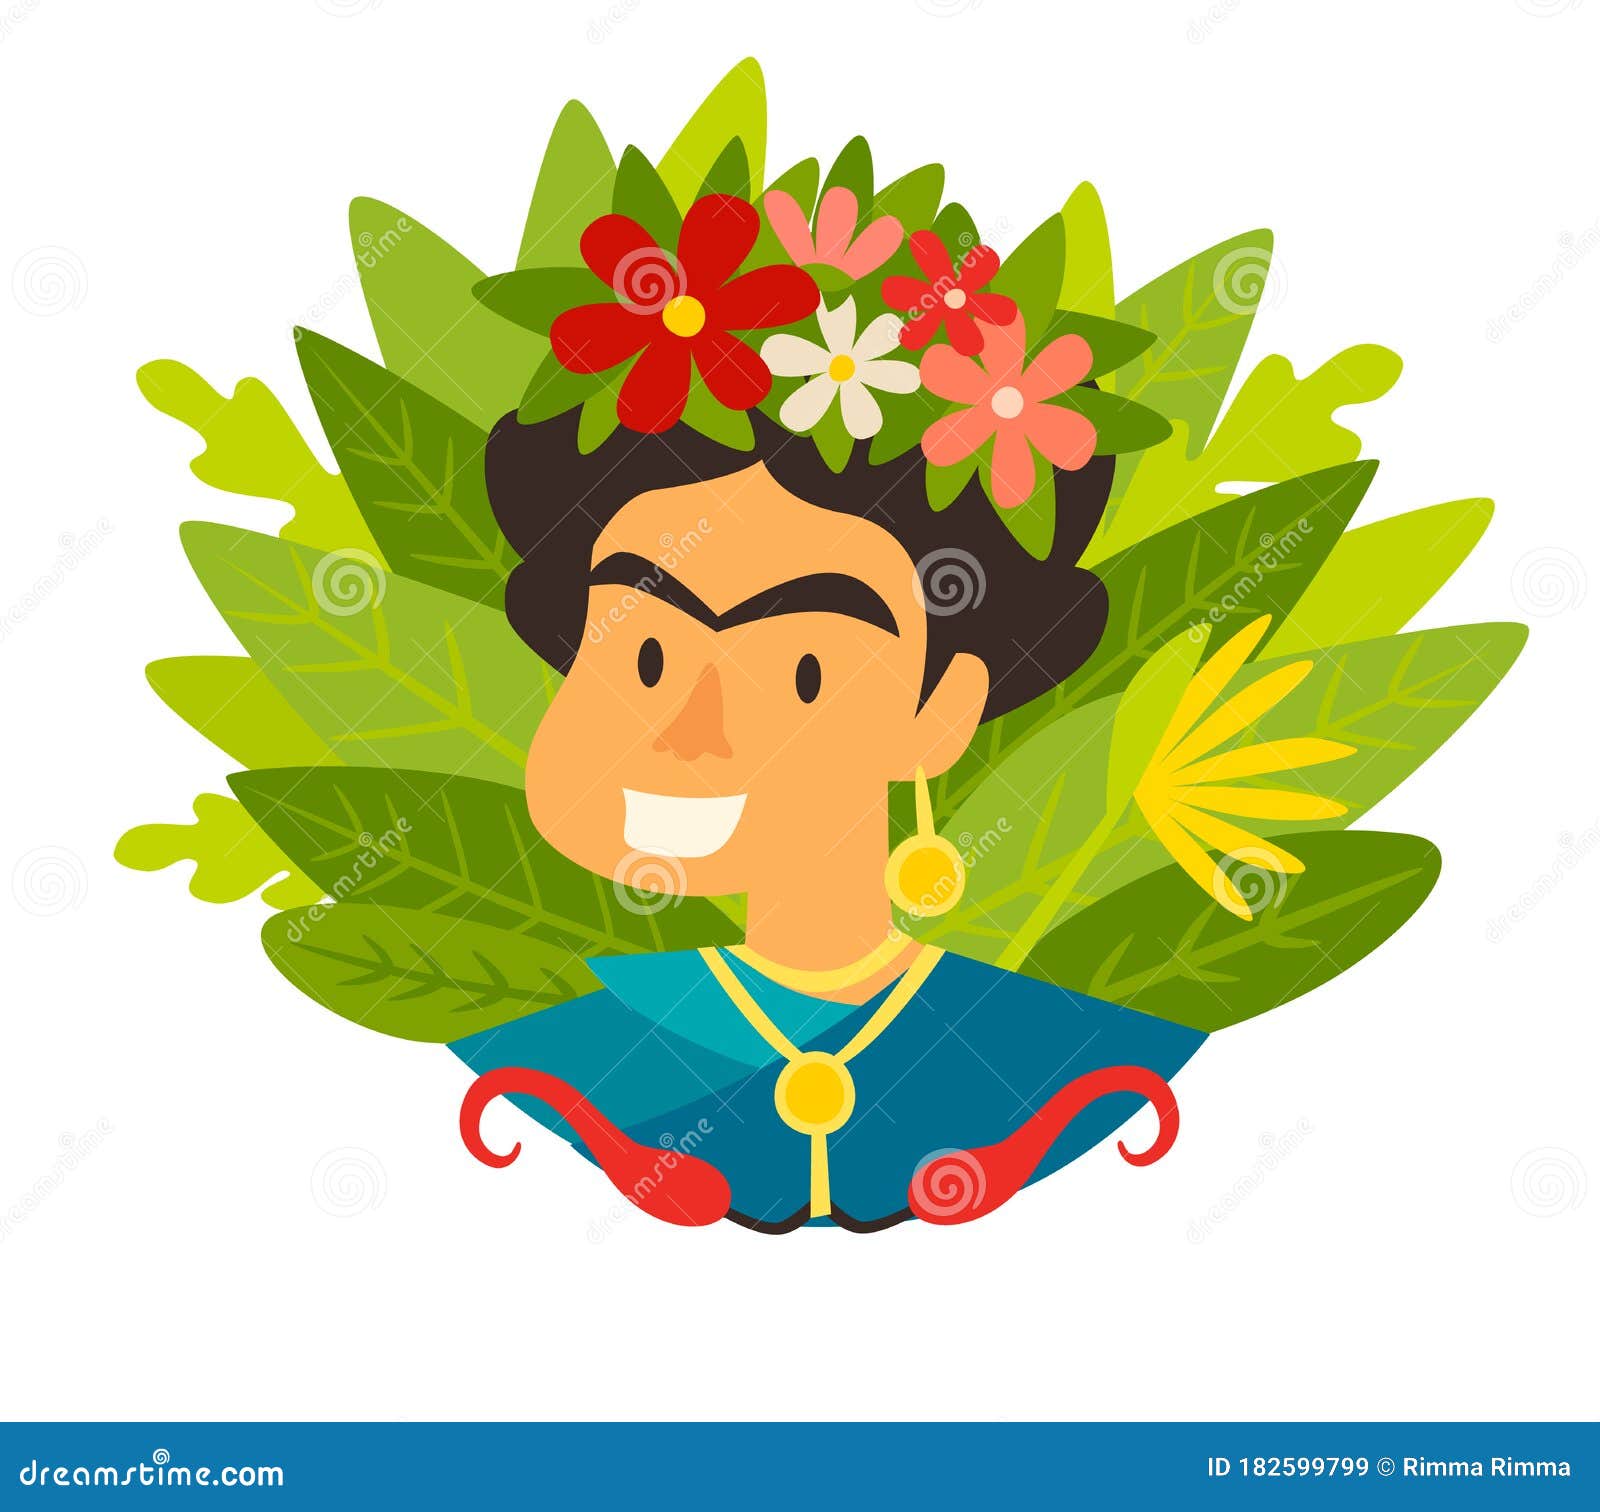 unibrow clipart of flowers